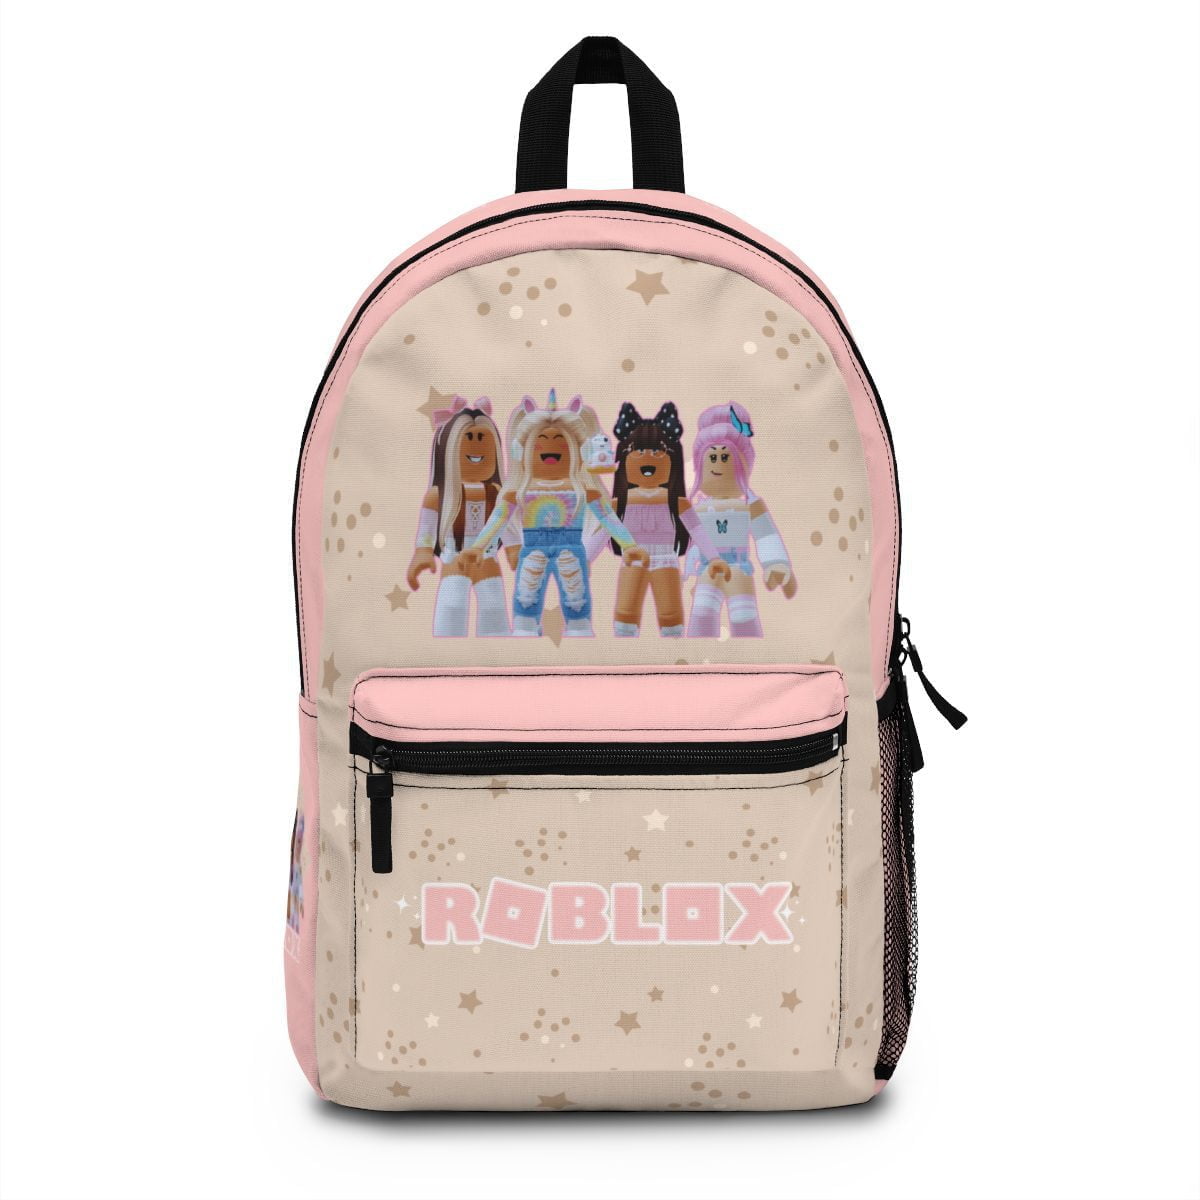 Light Pink and Beige Roblox Girls Backpack Cool Kiddo 10